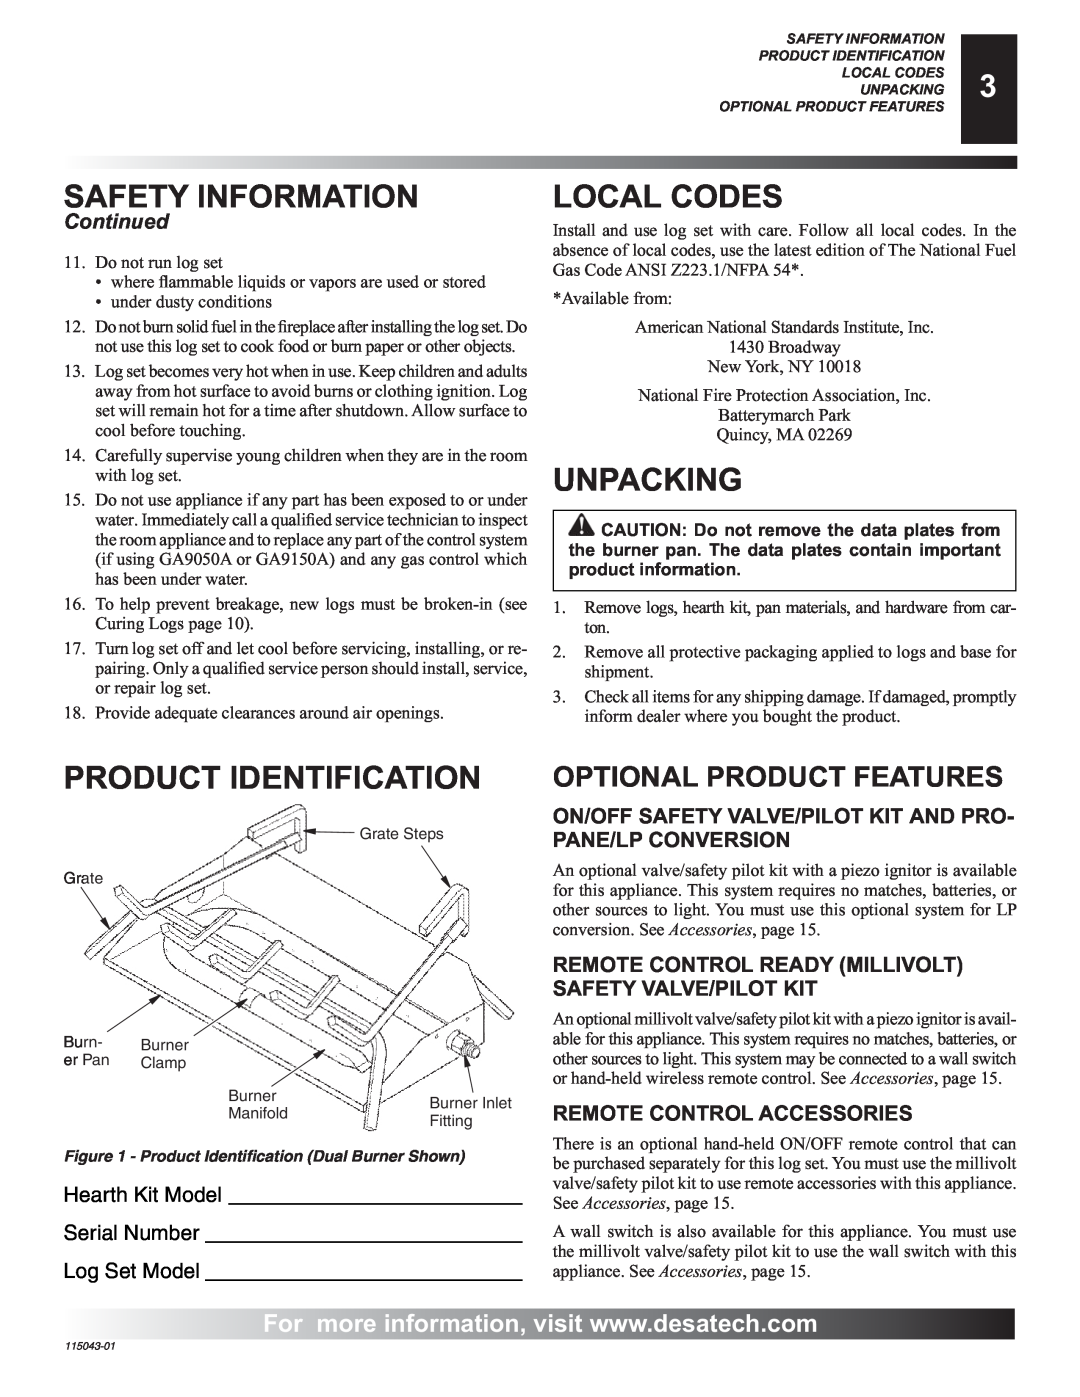 Desa RGA 2-72 Safety Information, Local Codes, Unpacking, Product Identification, Optional Product Features, Continued 